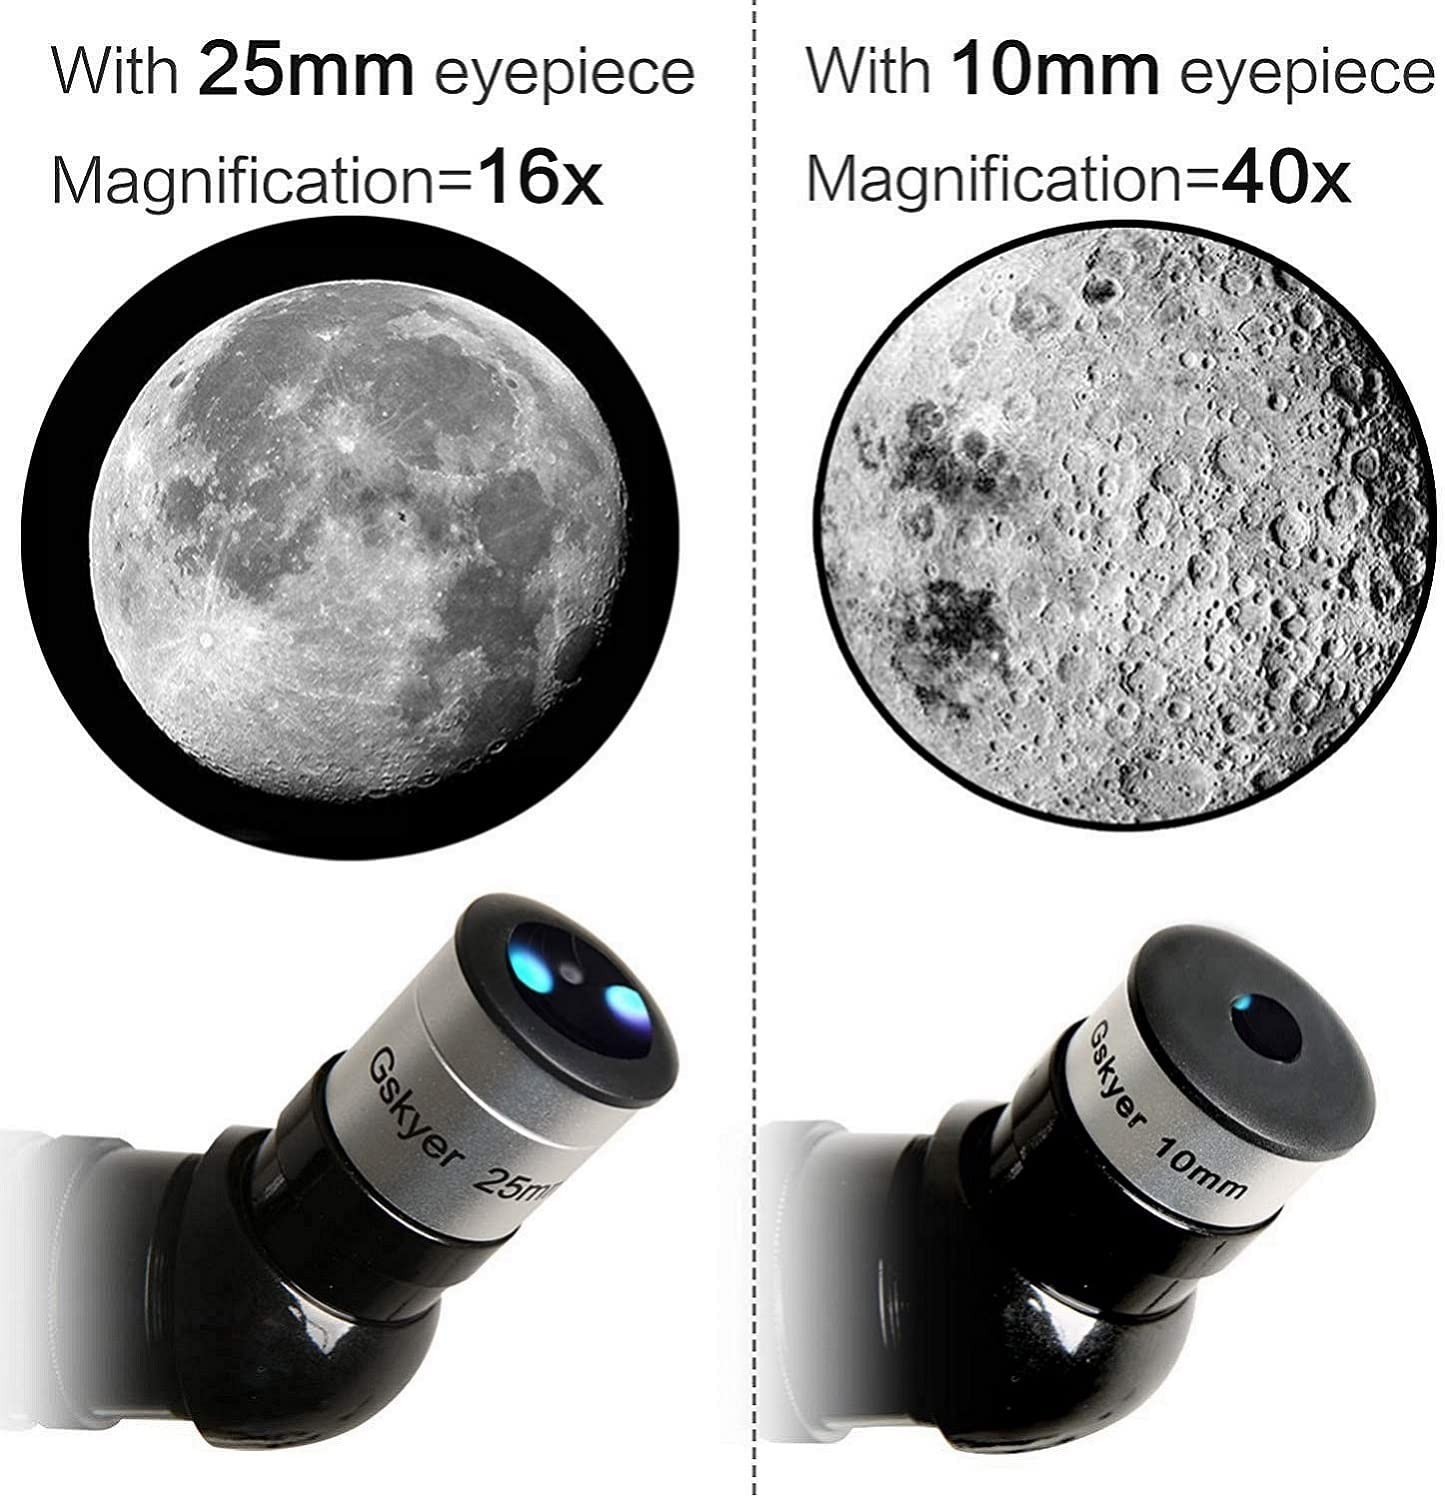 A collage of 2 images showing the difference between the 25mm and 10mm eyepiece used on the A Gskyer 80mm refractor telescope.